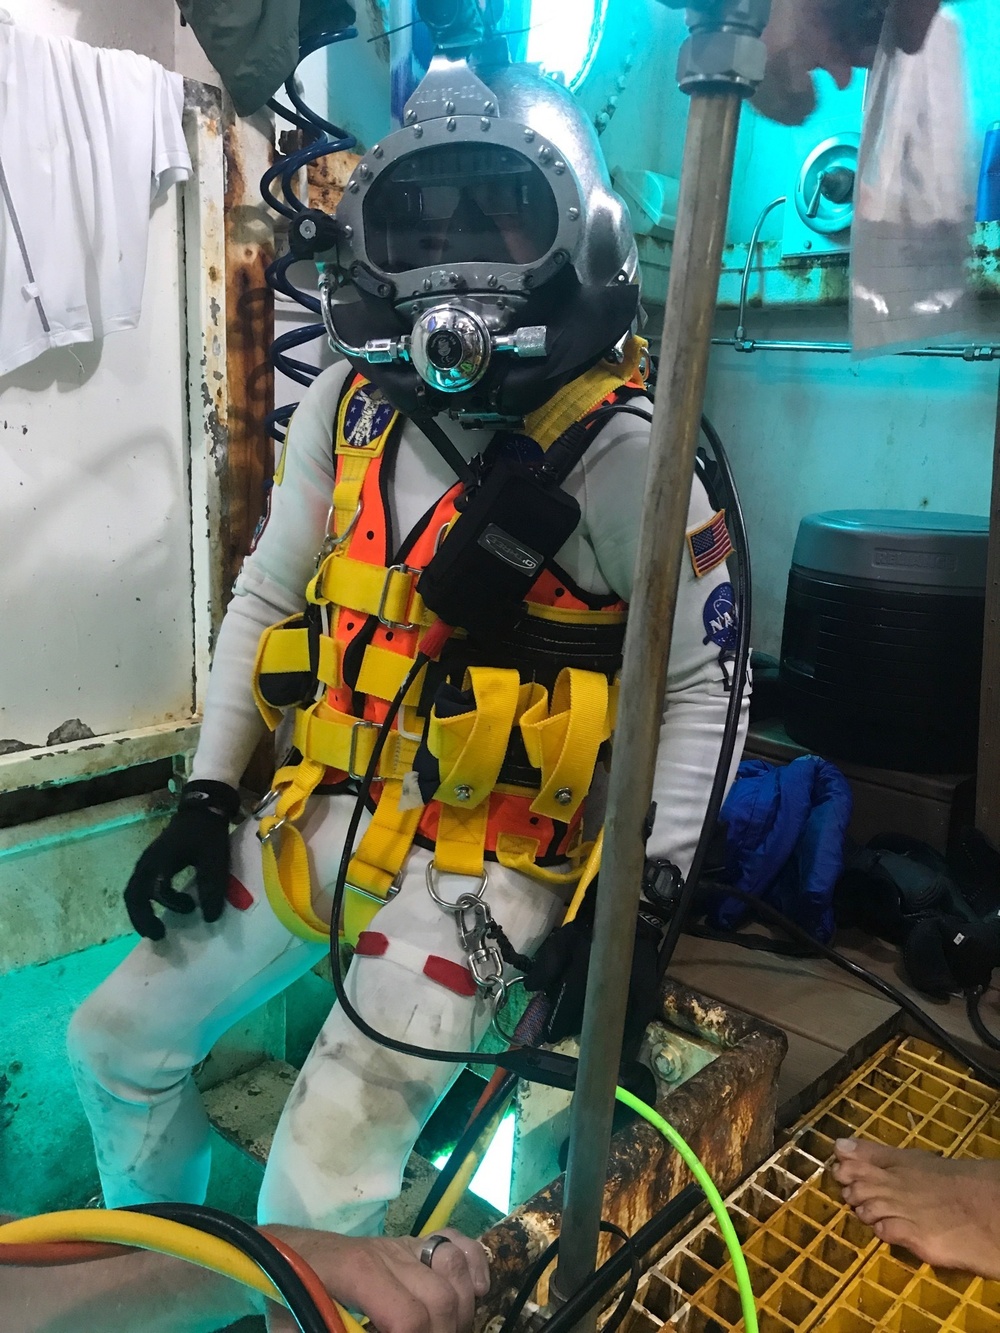 Navy diving equipment tested by astronauts for space exploration missions